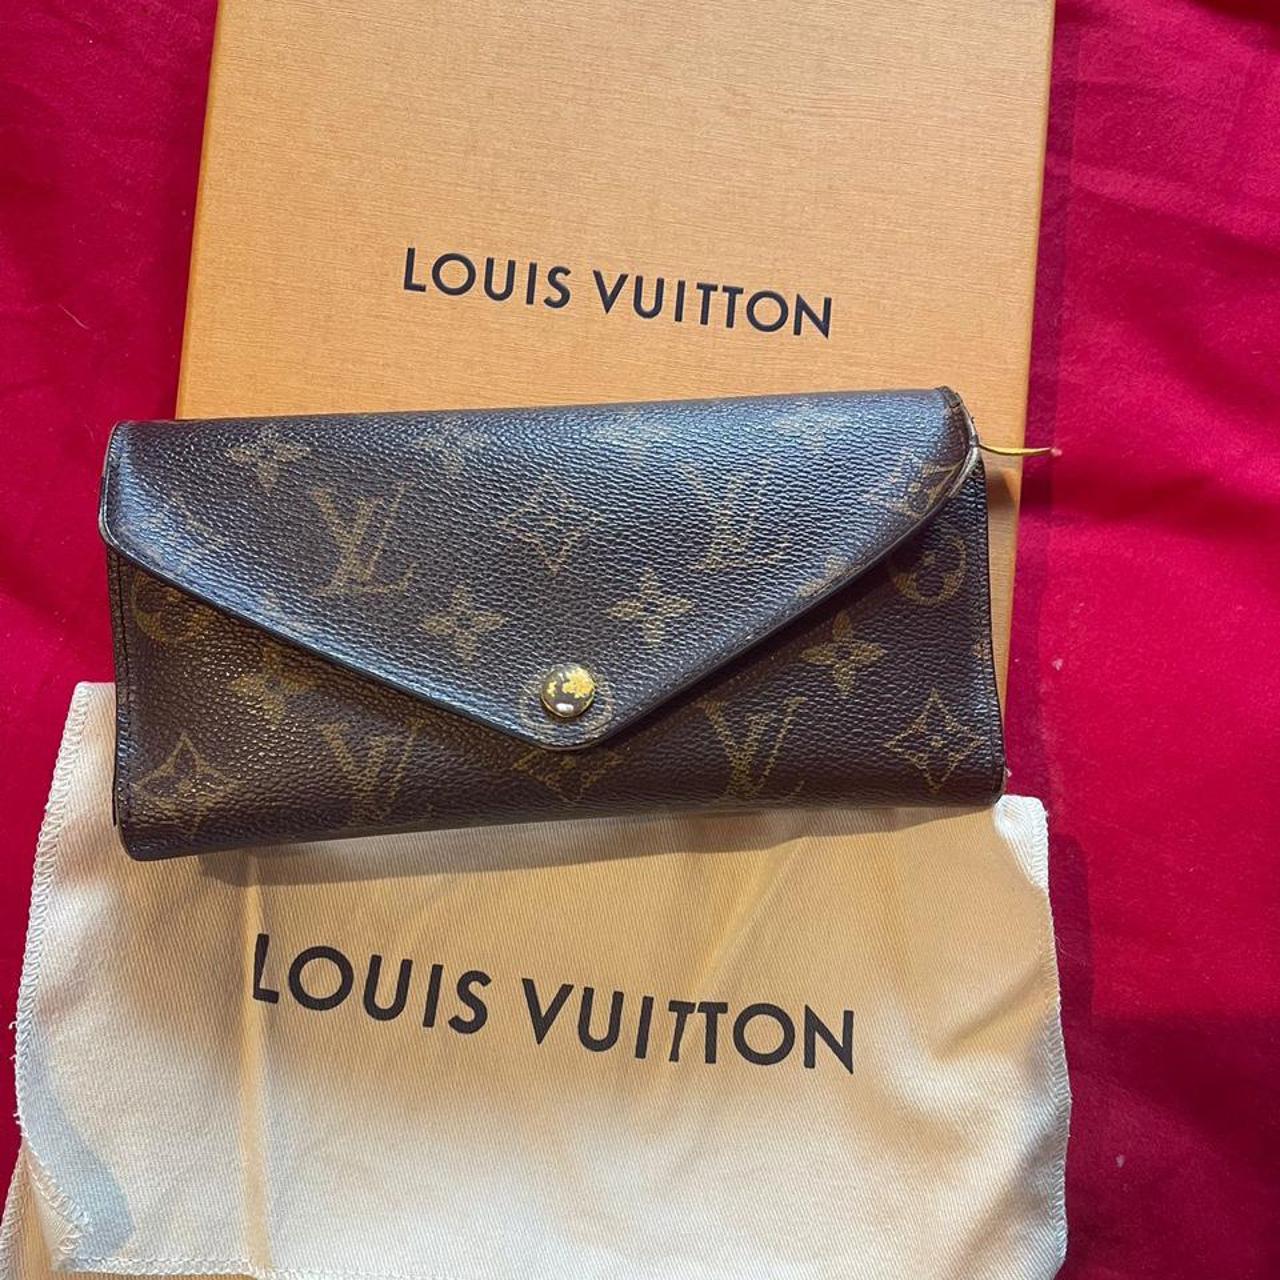 Vintage Louis Vuitton Bag with minor wear and tear - Depop